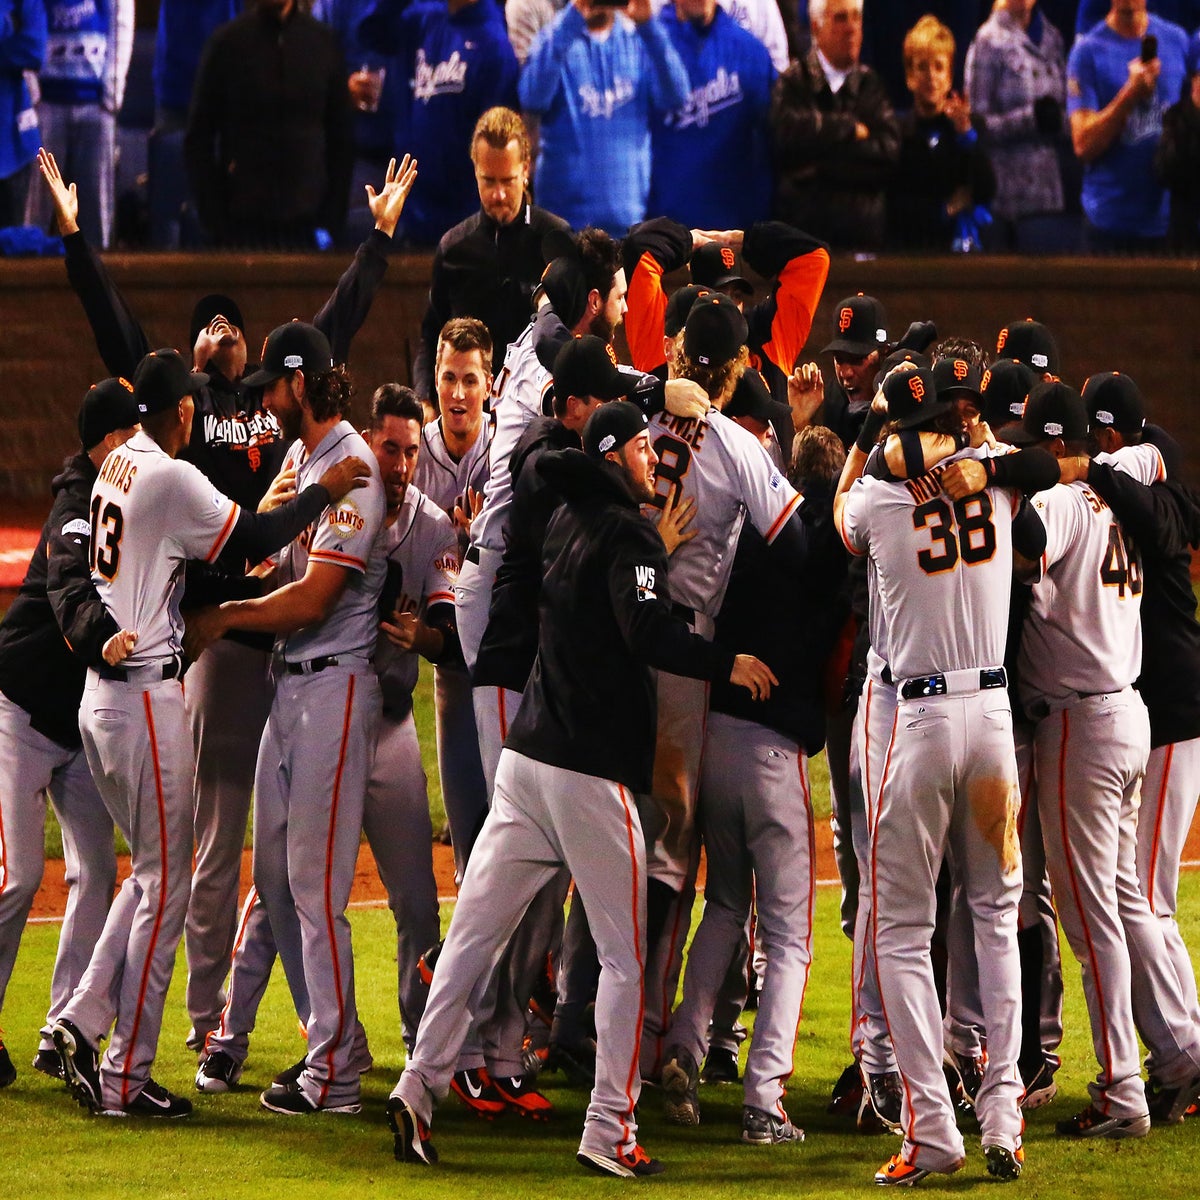 Giants End Royals' Run for 3rd Title in 5 Season